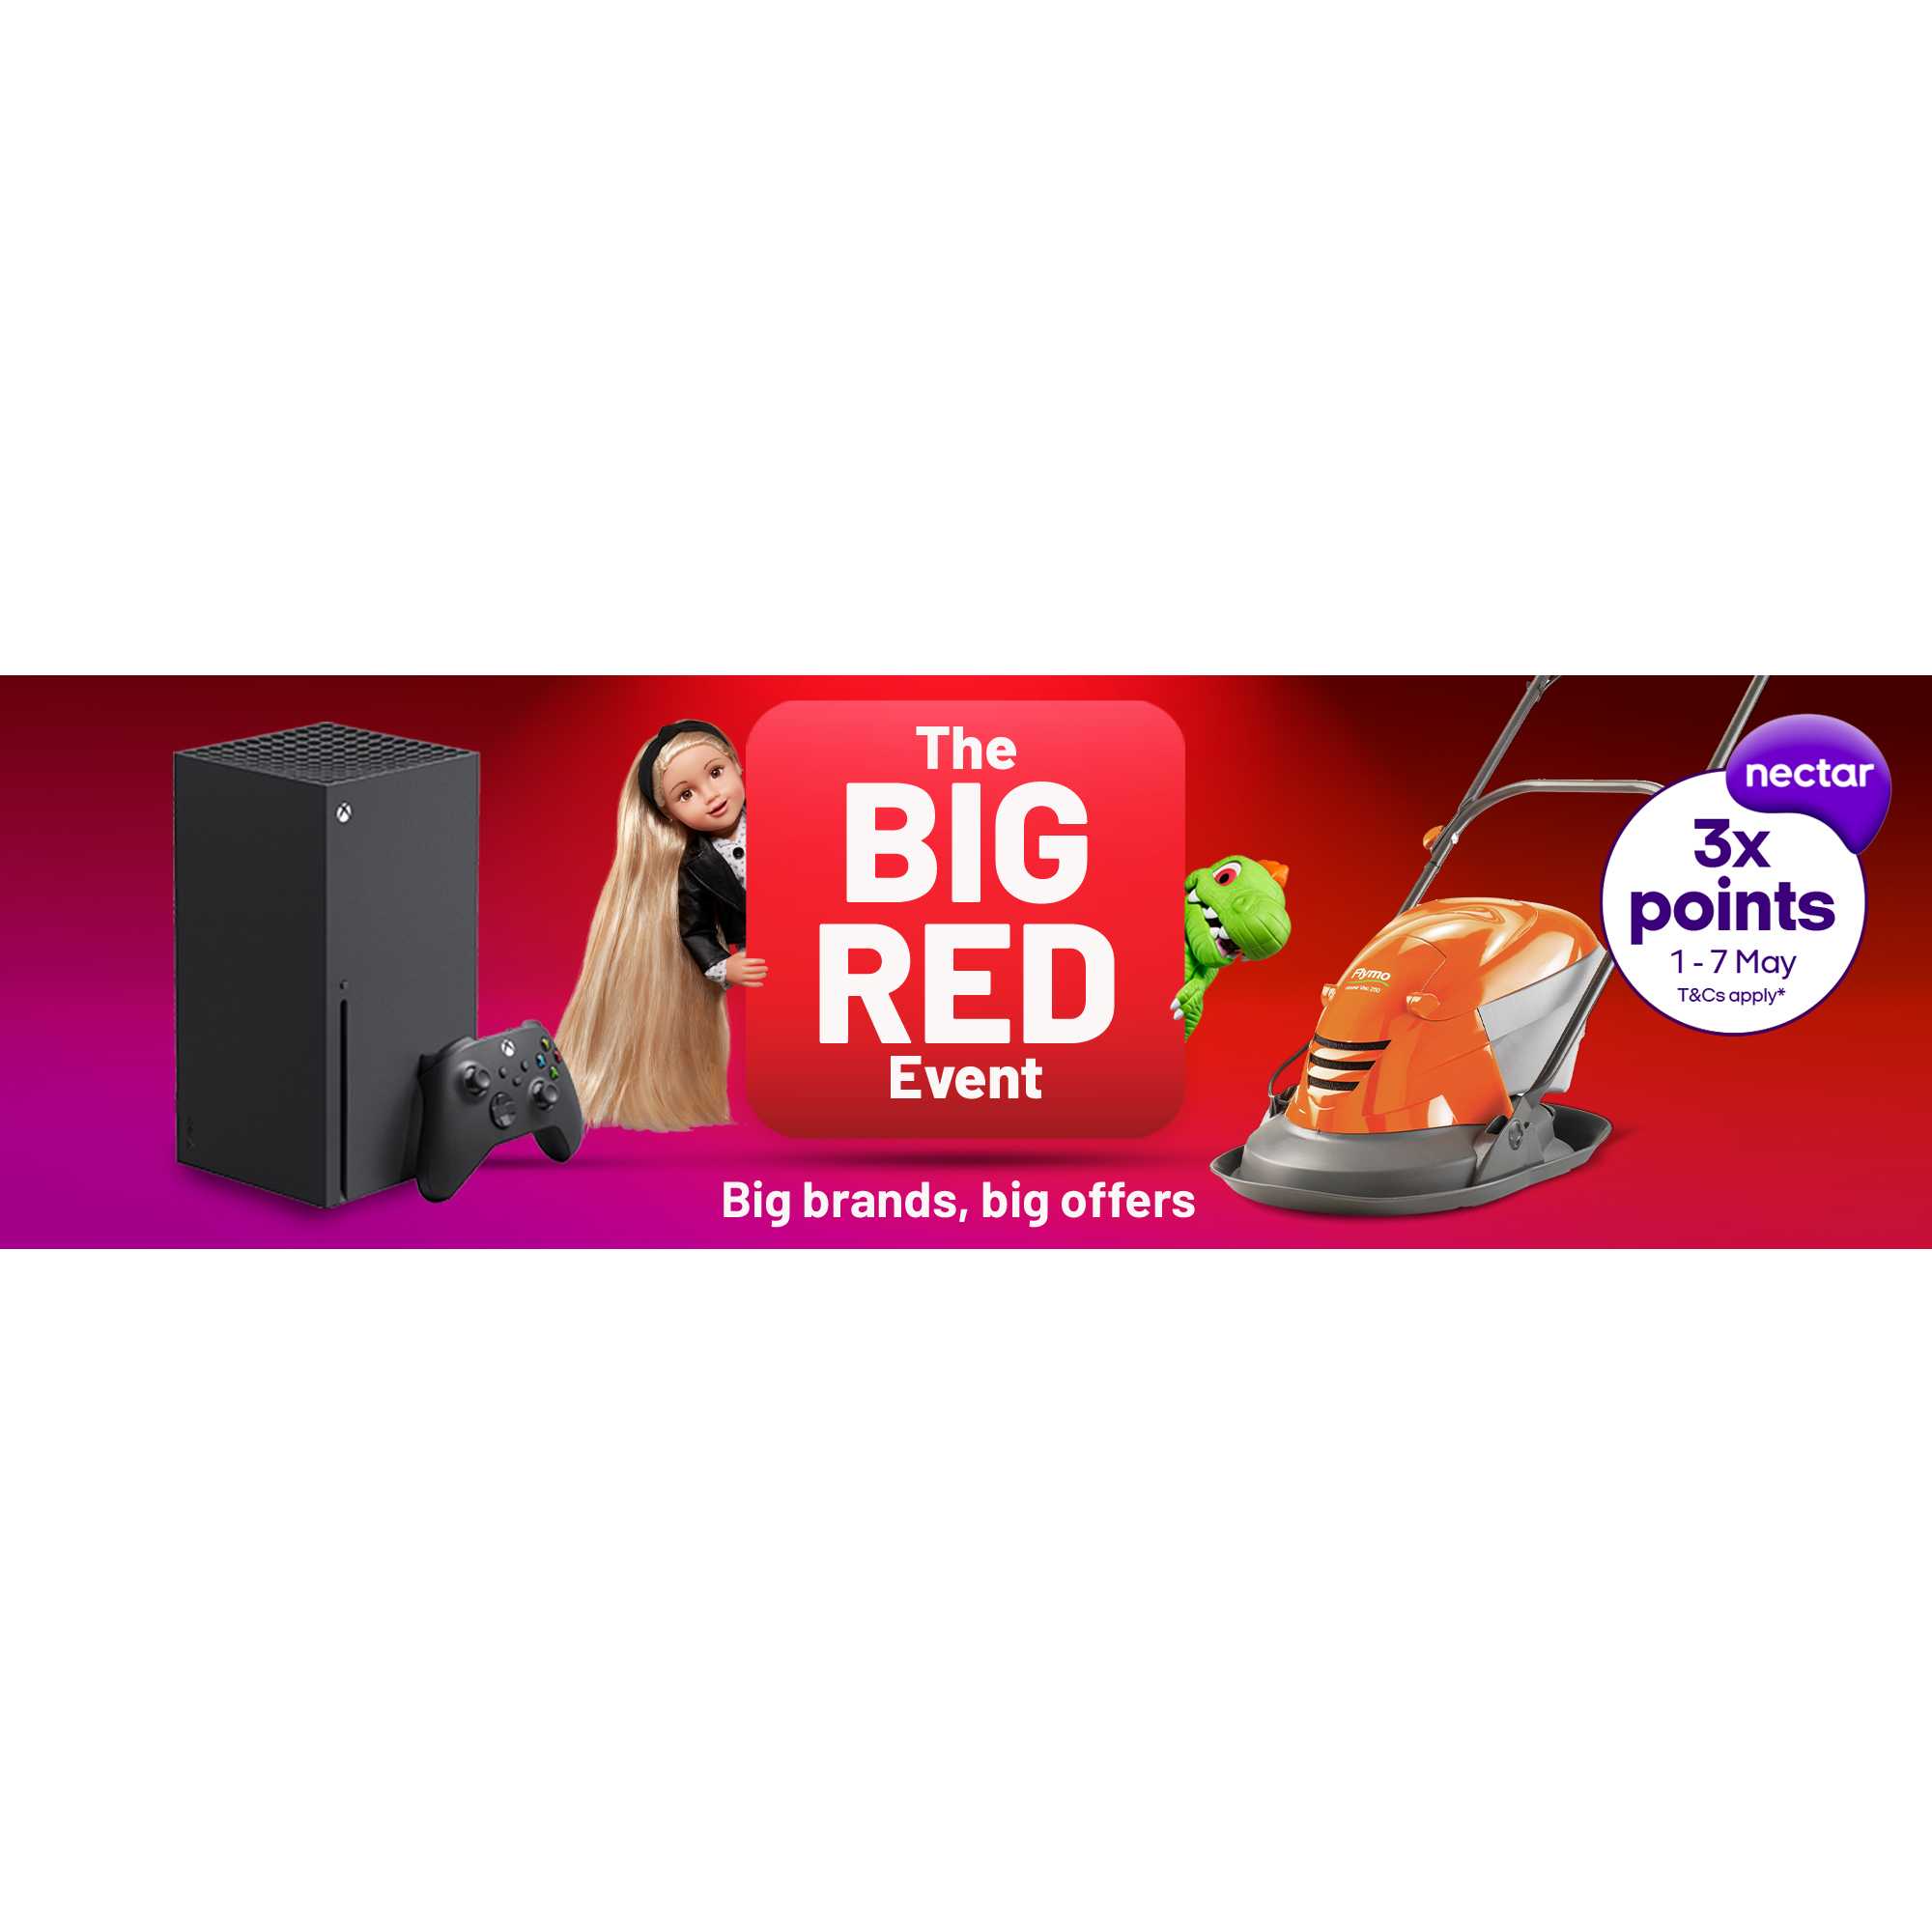 The BIG RED Event.